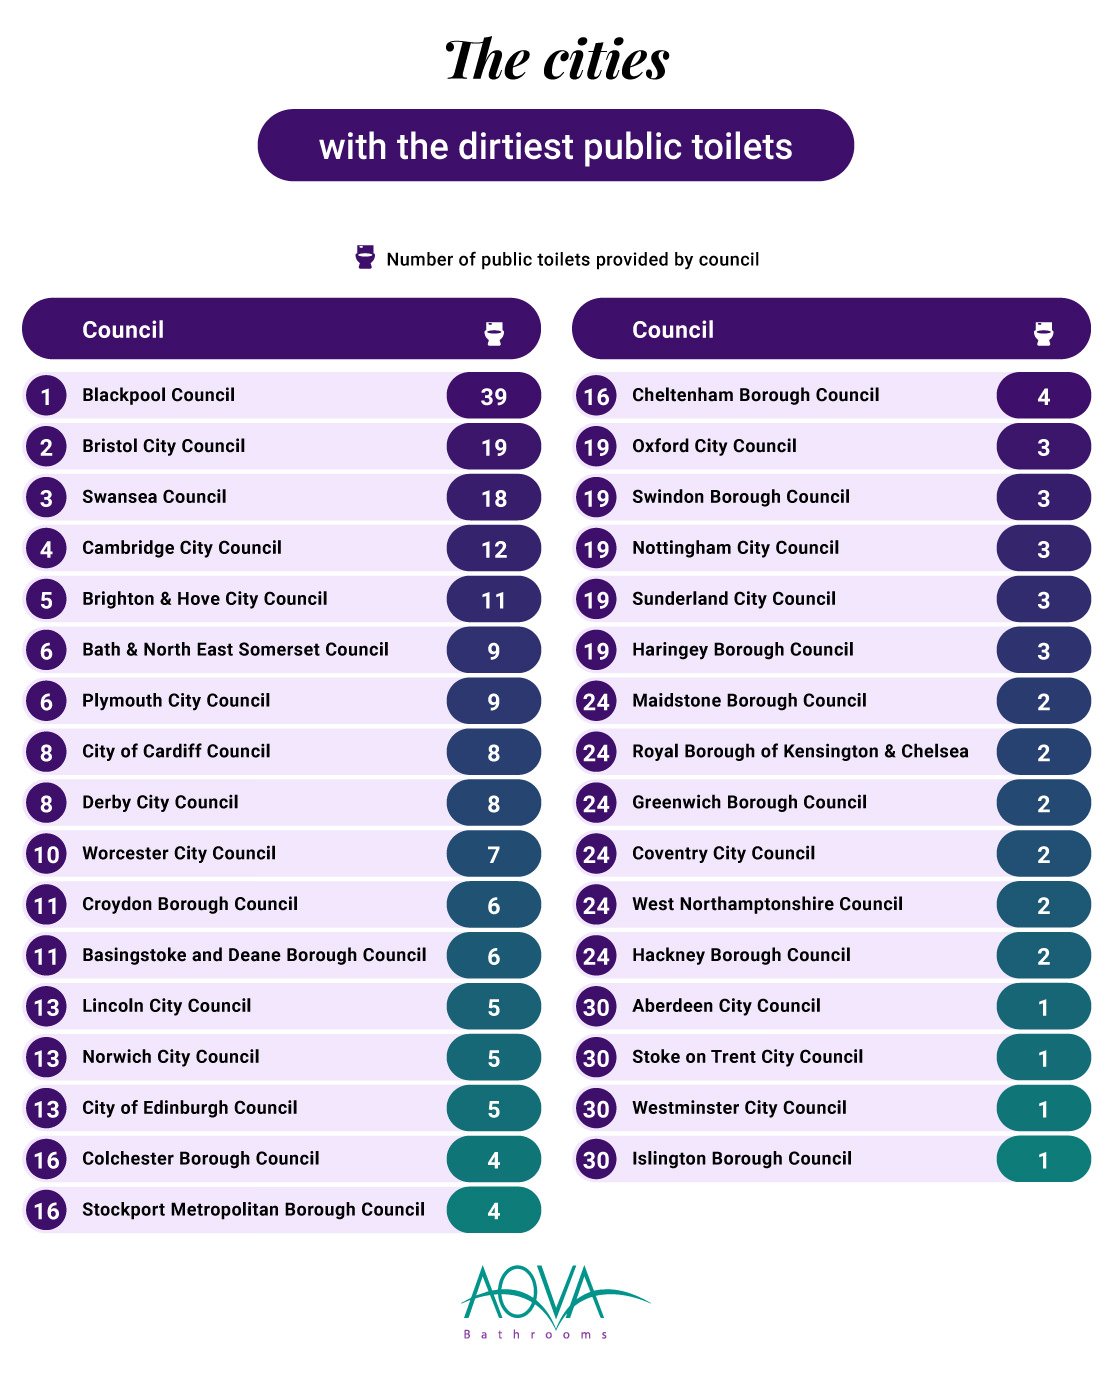 The cities with the dirtiest public toilets